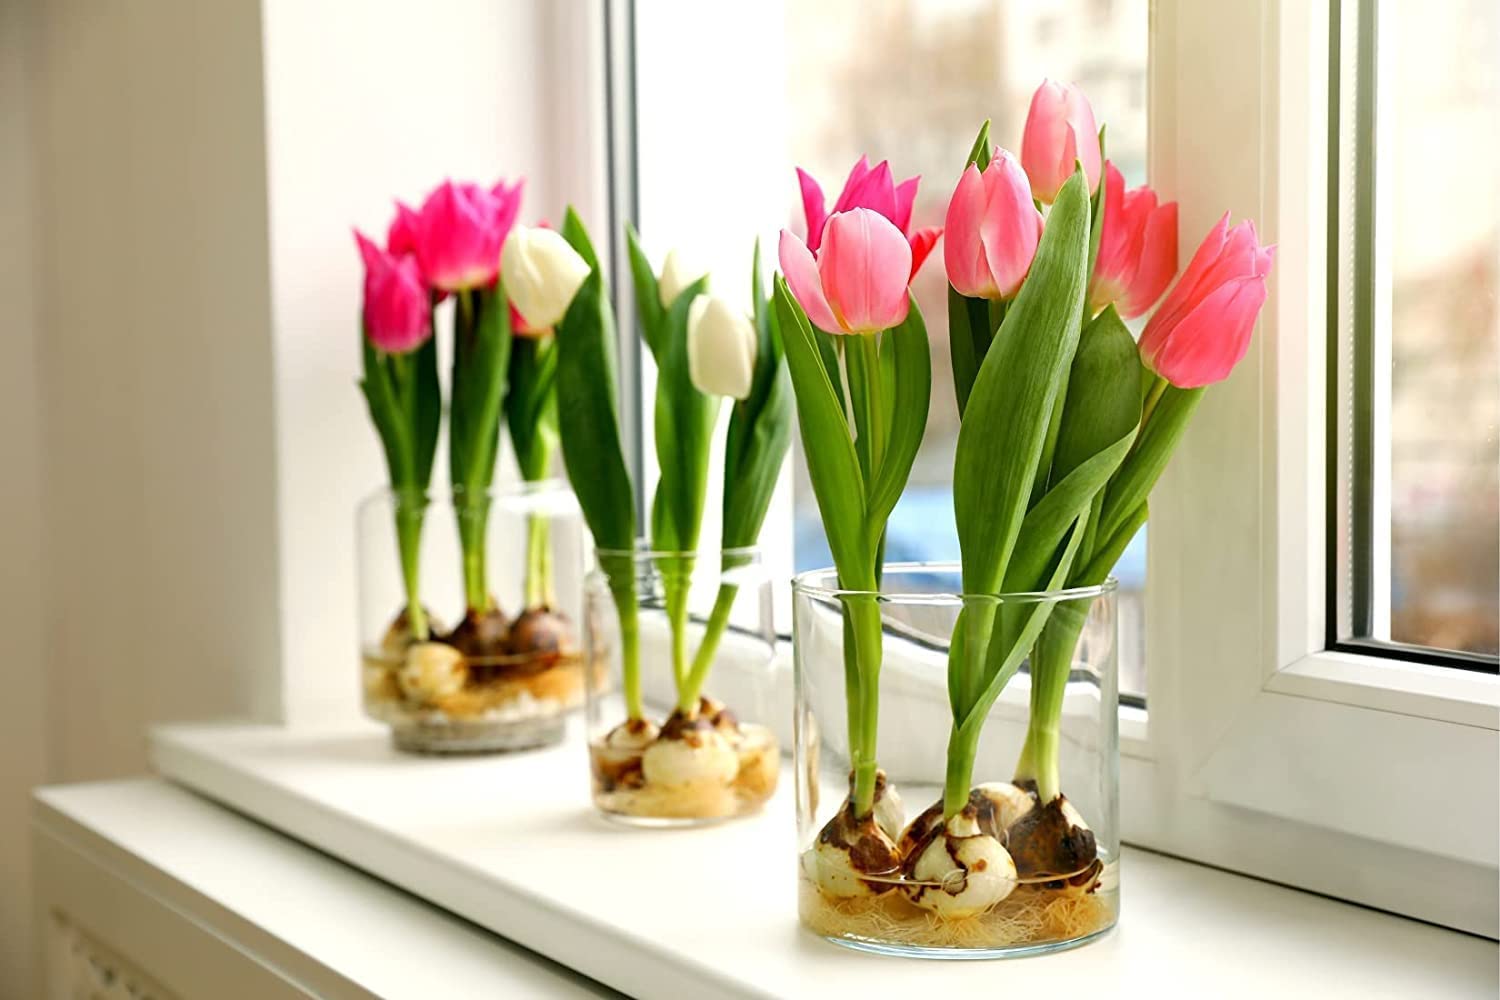 Pre-Chilled Tulip Bulbs for Forcing - Grow Indoors in Just Water - Mixed Color - Easy to Grow - Vase Not Included - Prechilled Indoor Bulbs (10 Bulbs)